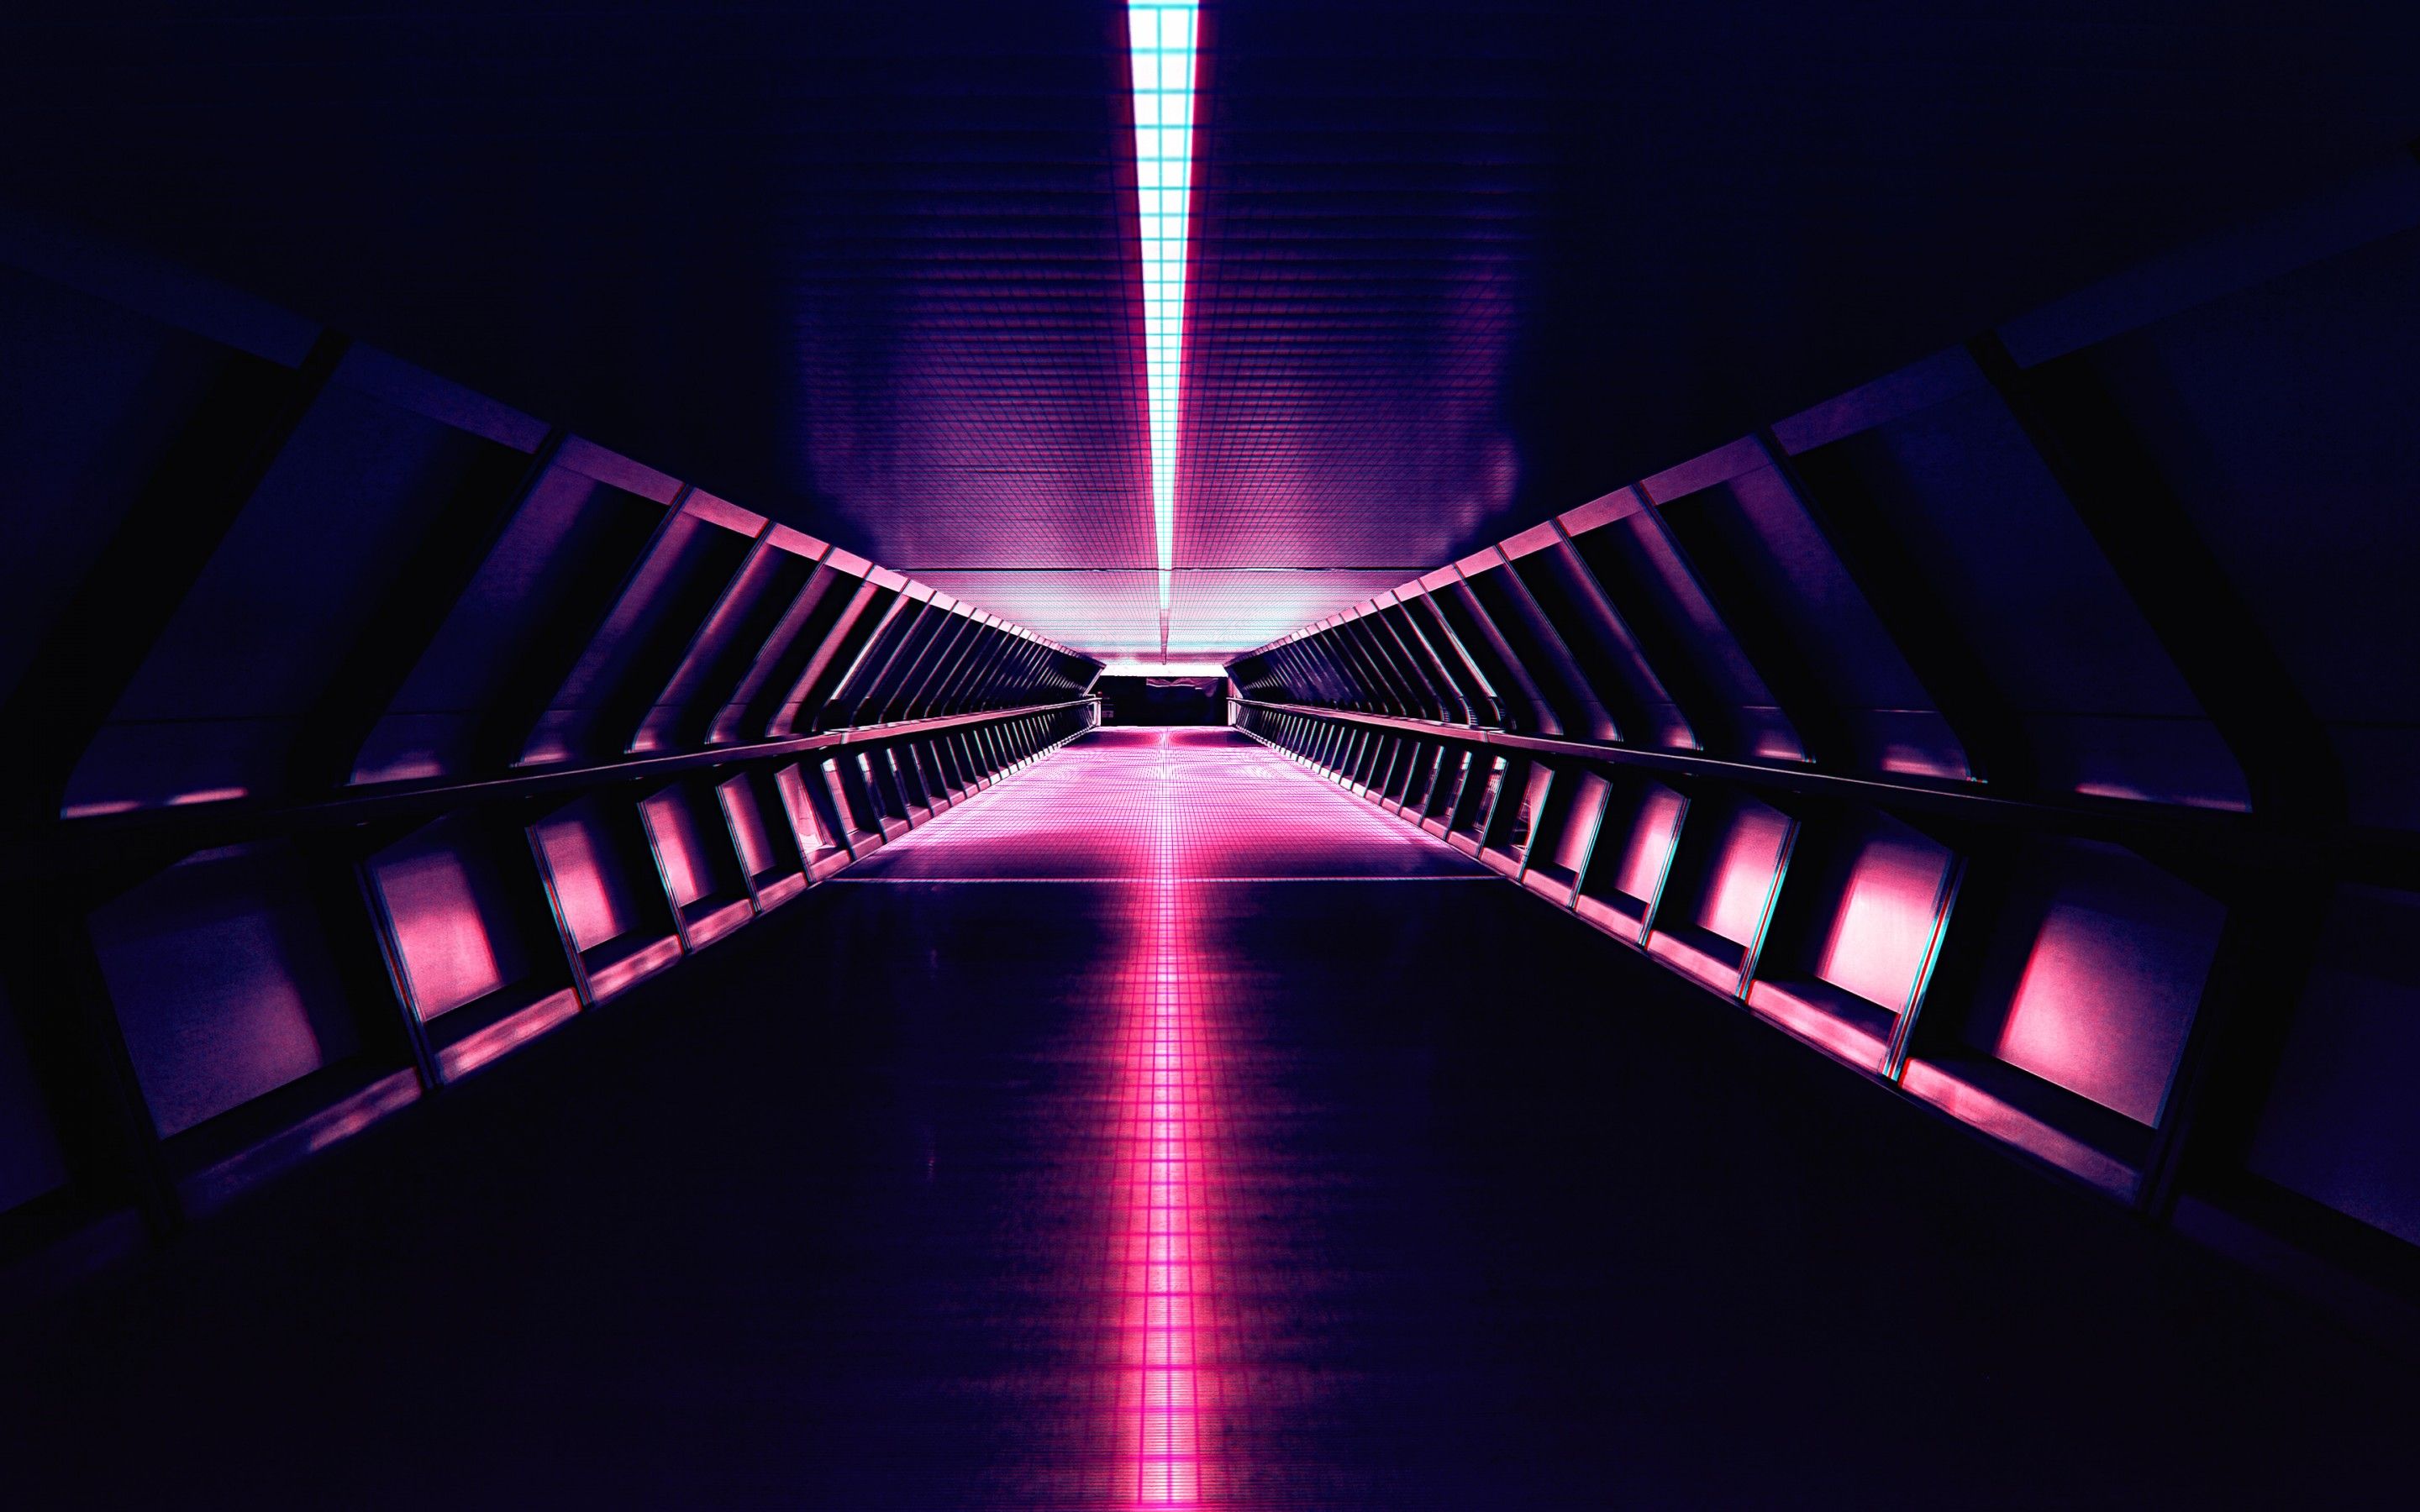 Wallpaper Synthwave, Retro, Electronic music, Neon, Architecture, Purple, Pink, 4K, Creative Graphics,. Wallpaper for iPhone, Android, Mobile and Desktop